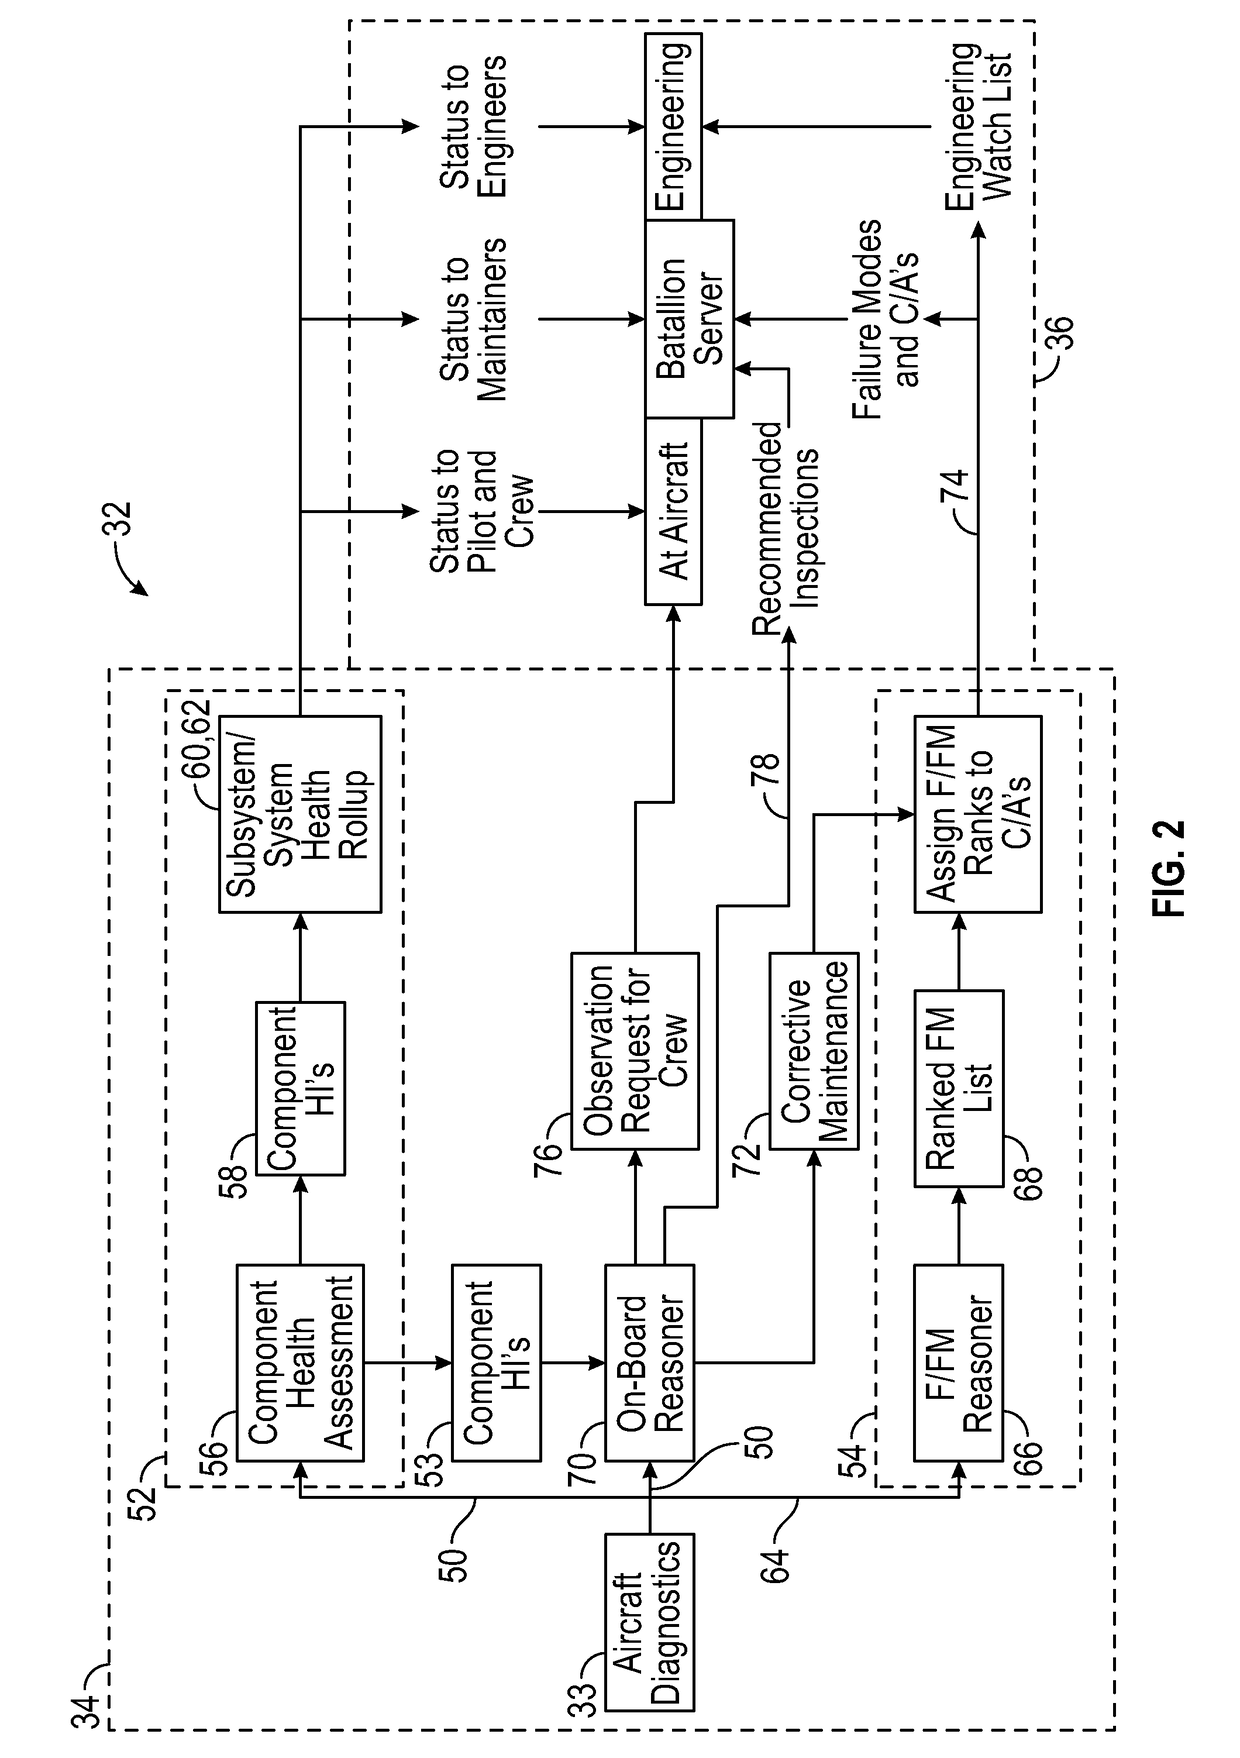 System and method for improved health management and maintenance decision support